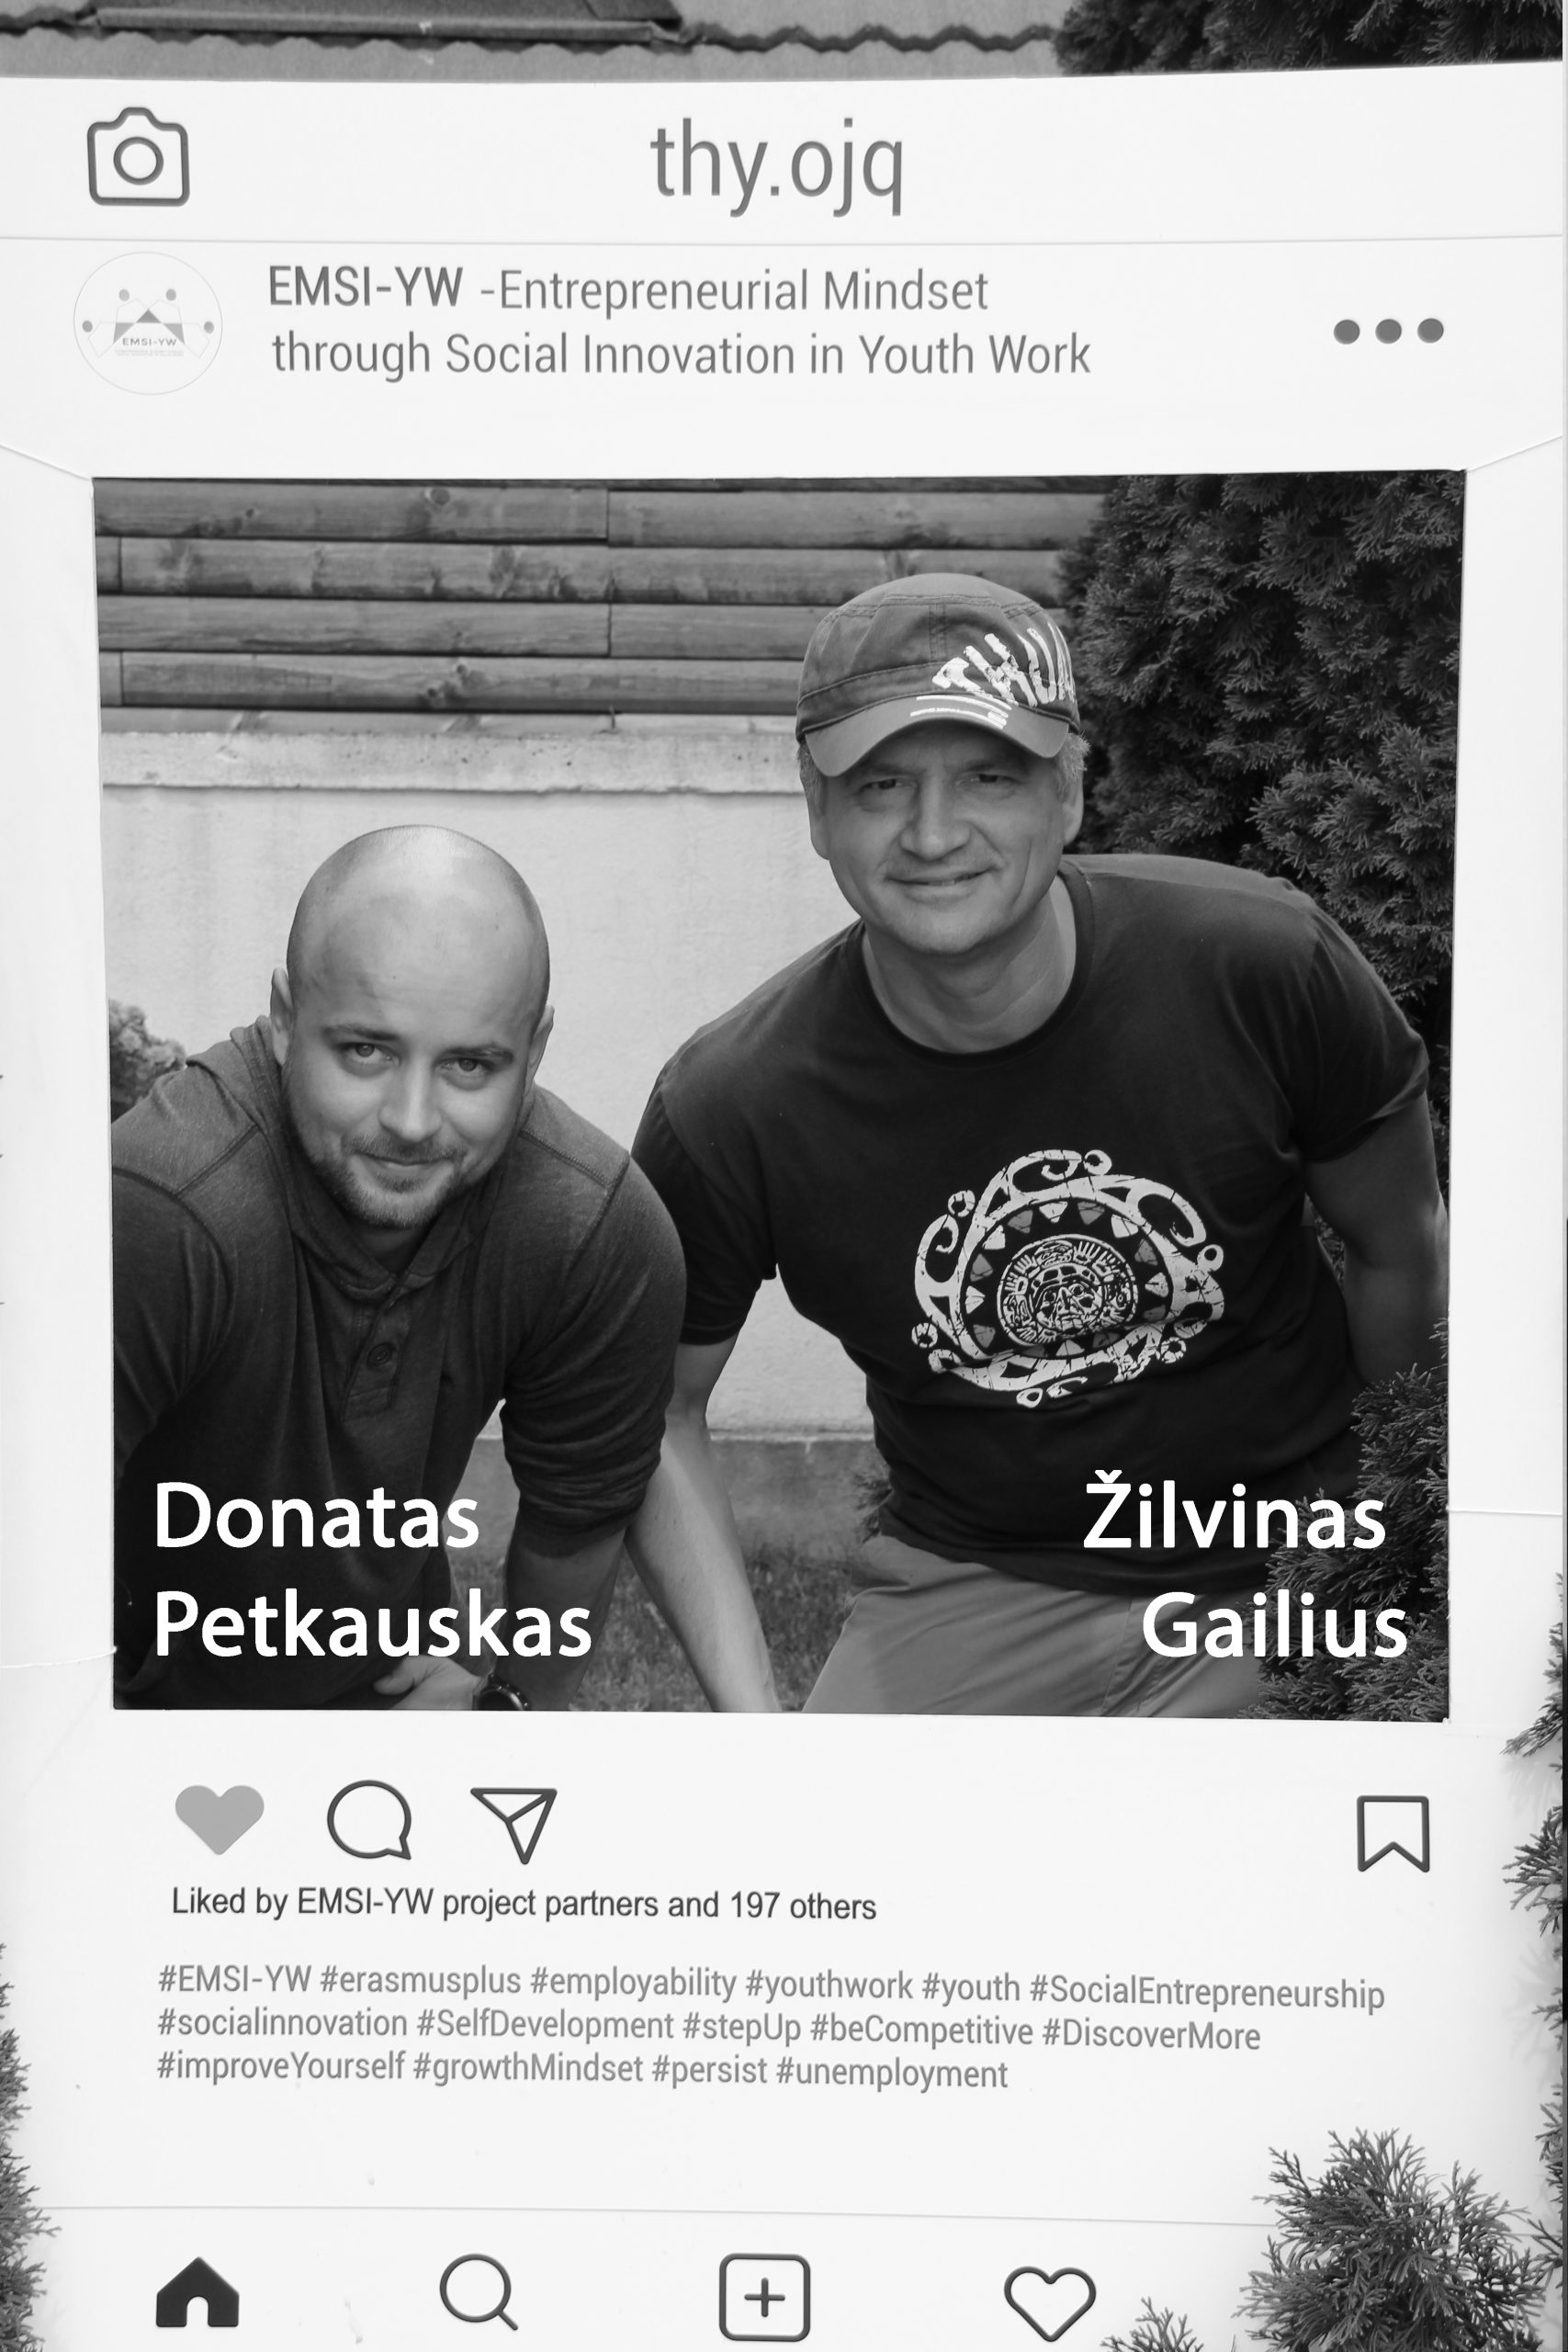 Interview of trainers Donatas and Å½ilvinas about EMSI-YW